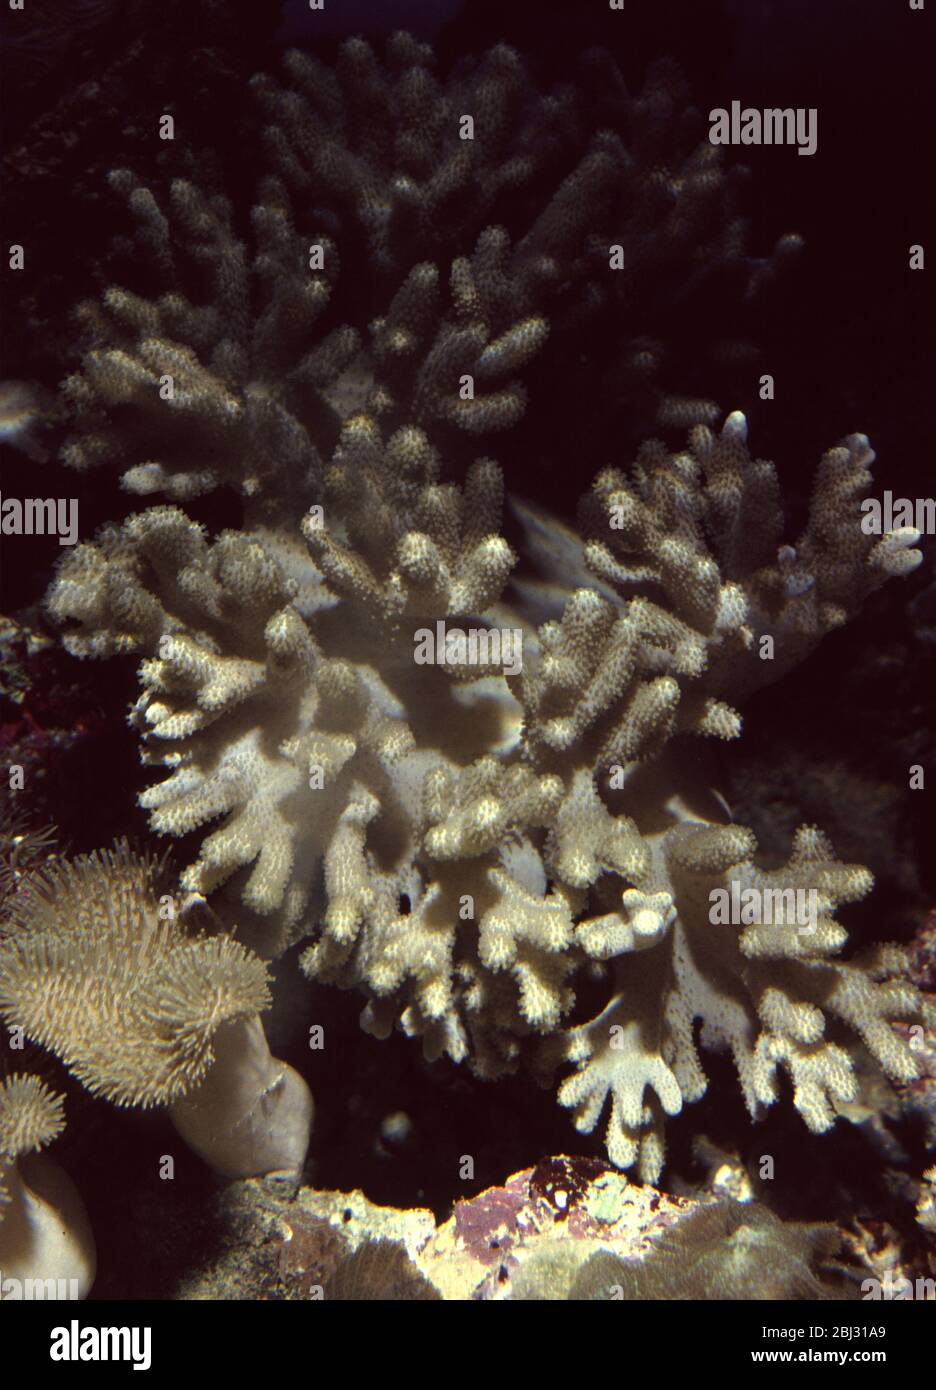 Finger leather coral, Sinularia sp. Stock Photo